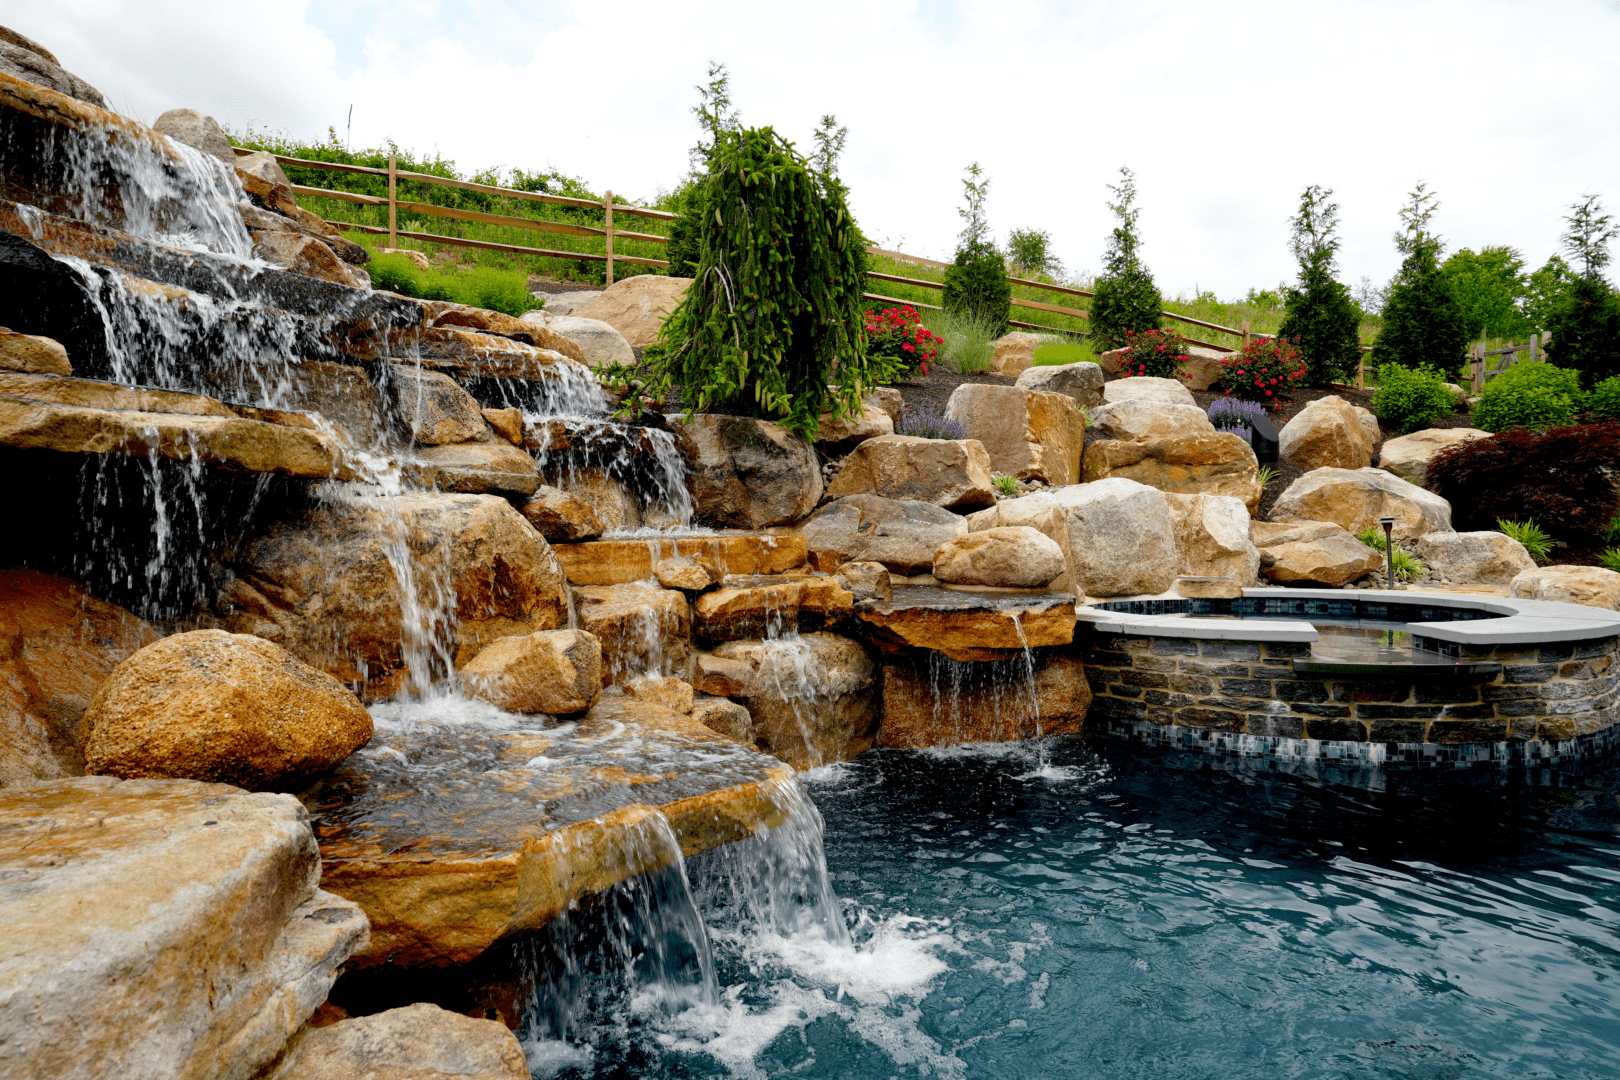 A pool with enchanting water features, including a graceful waterfall.